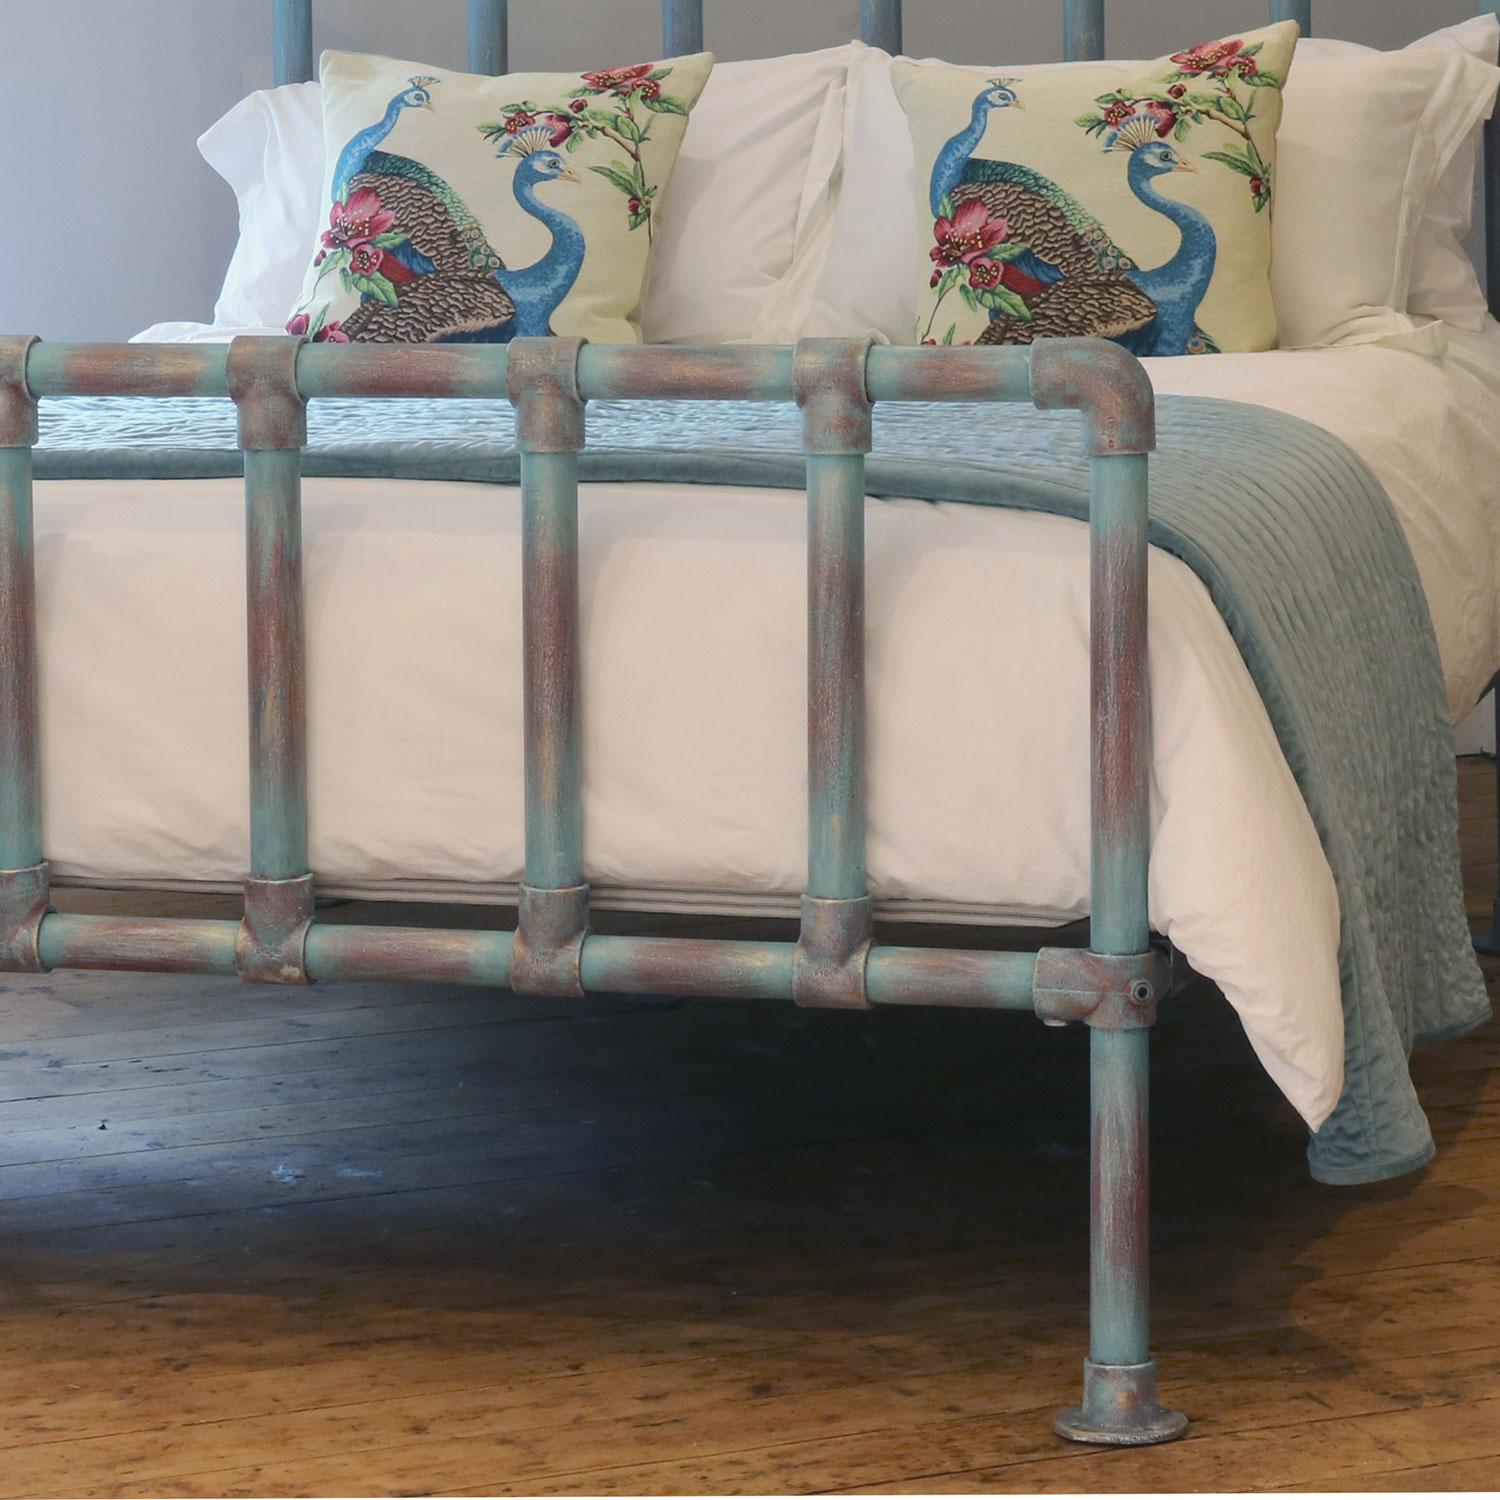 scaffold bed frame